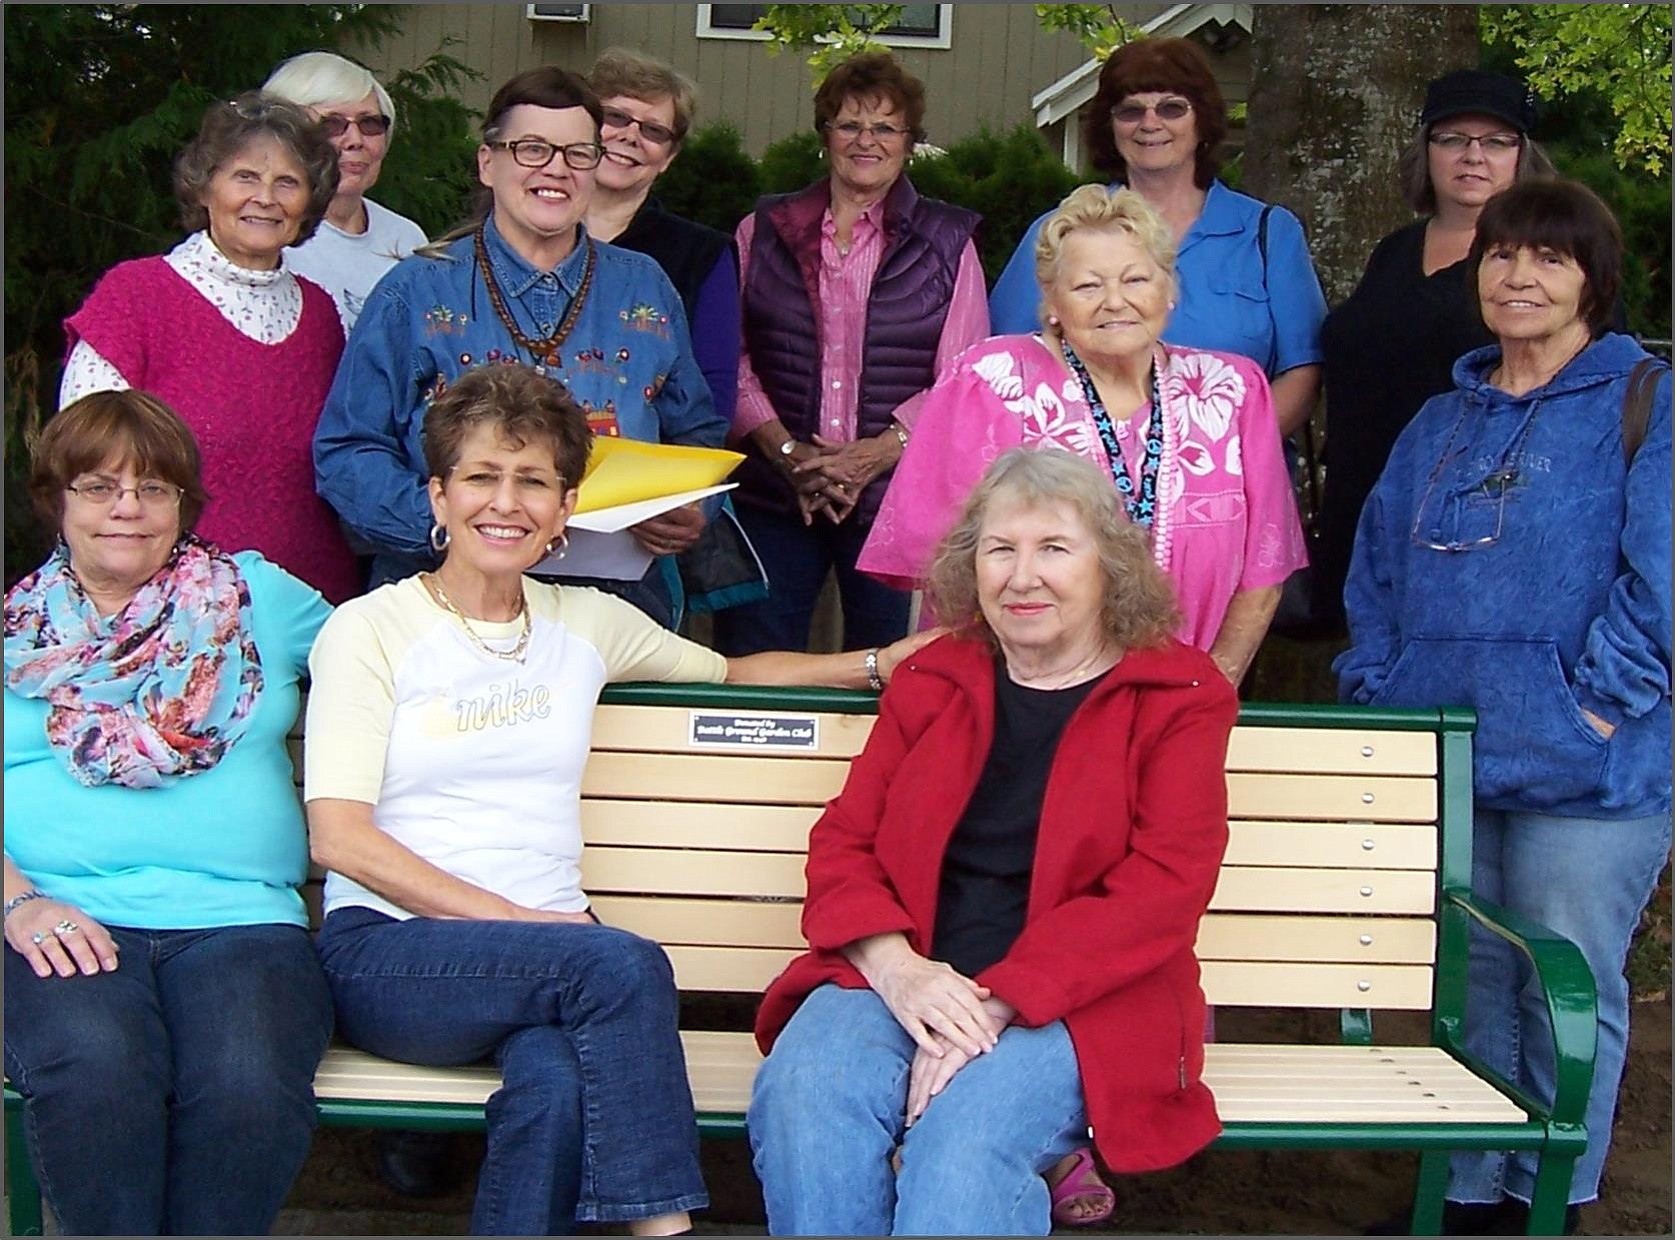 Battle Ground: The Garden Club, established in 1948, has finally decided to call it a day - but not before donating a bench and all remaining assets to Kiwanis Park and the Veterans Memorial Project there.